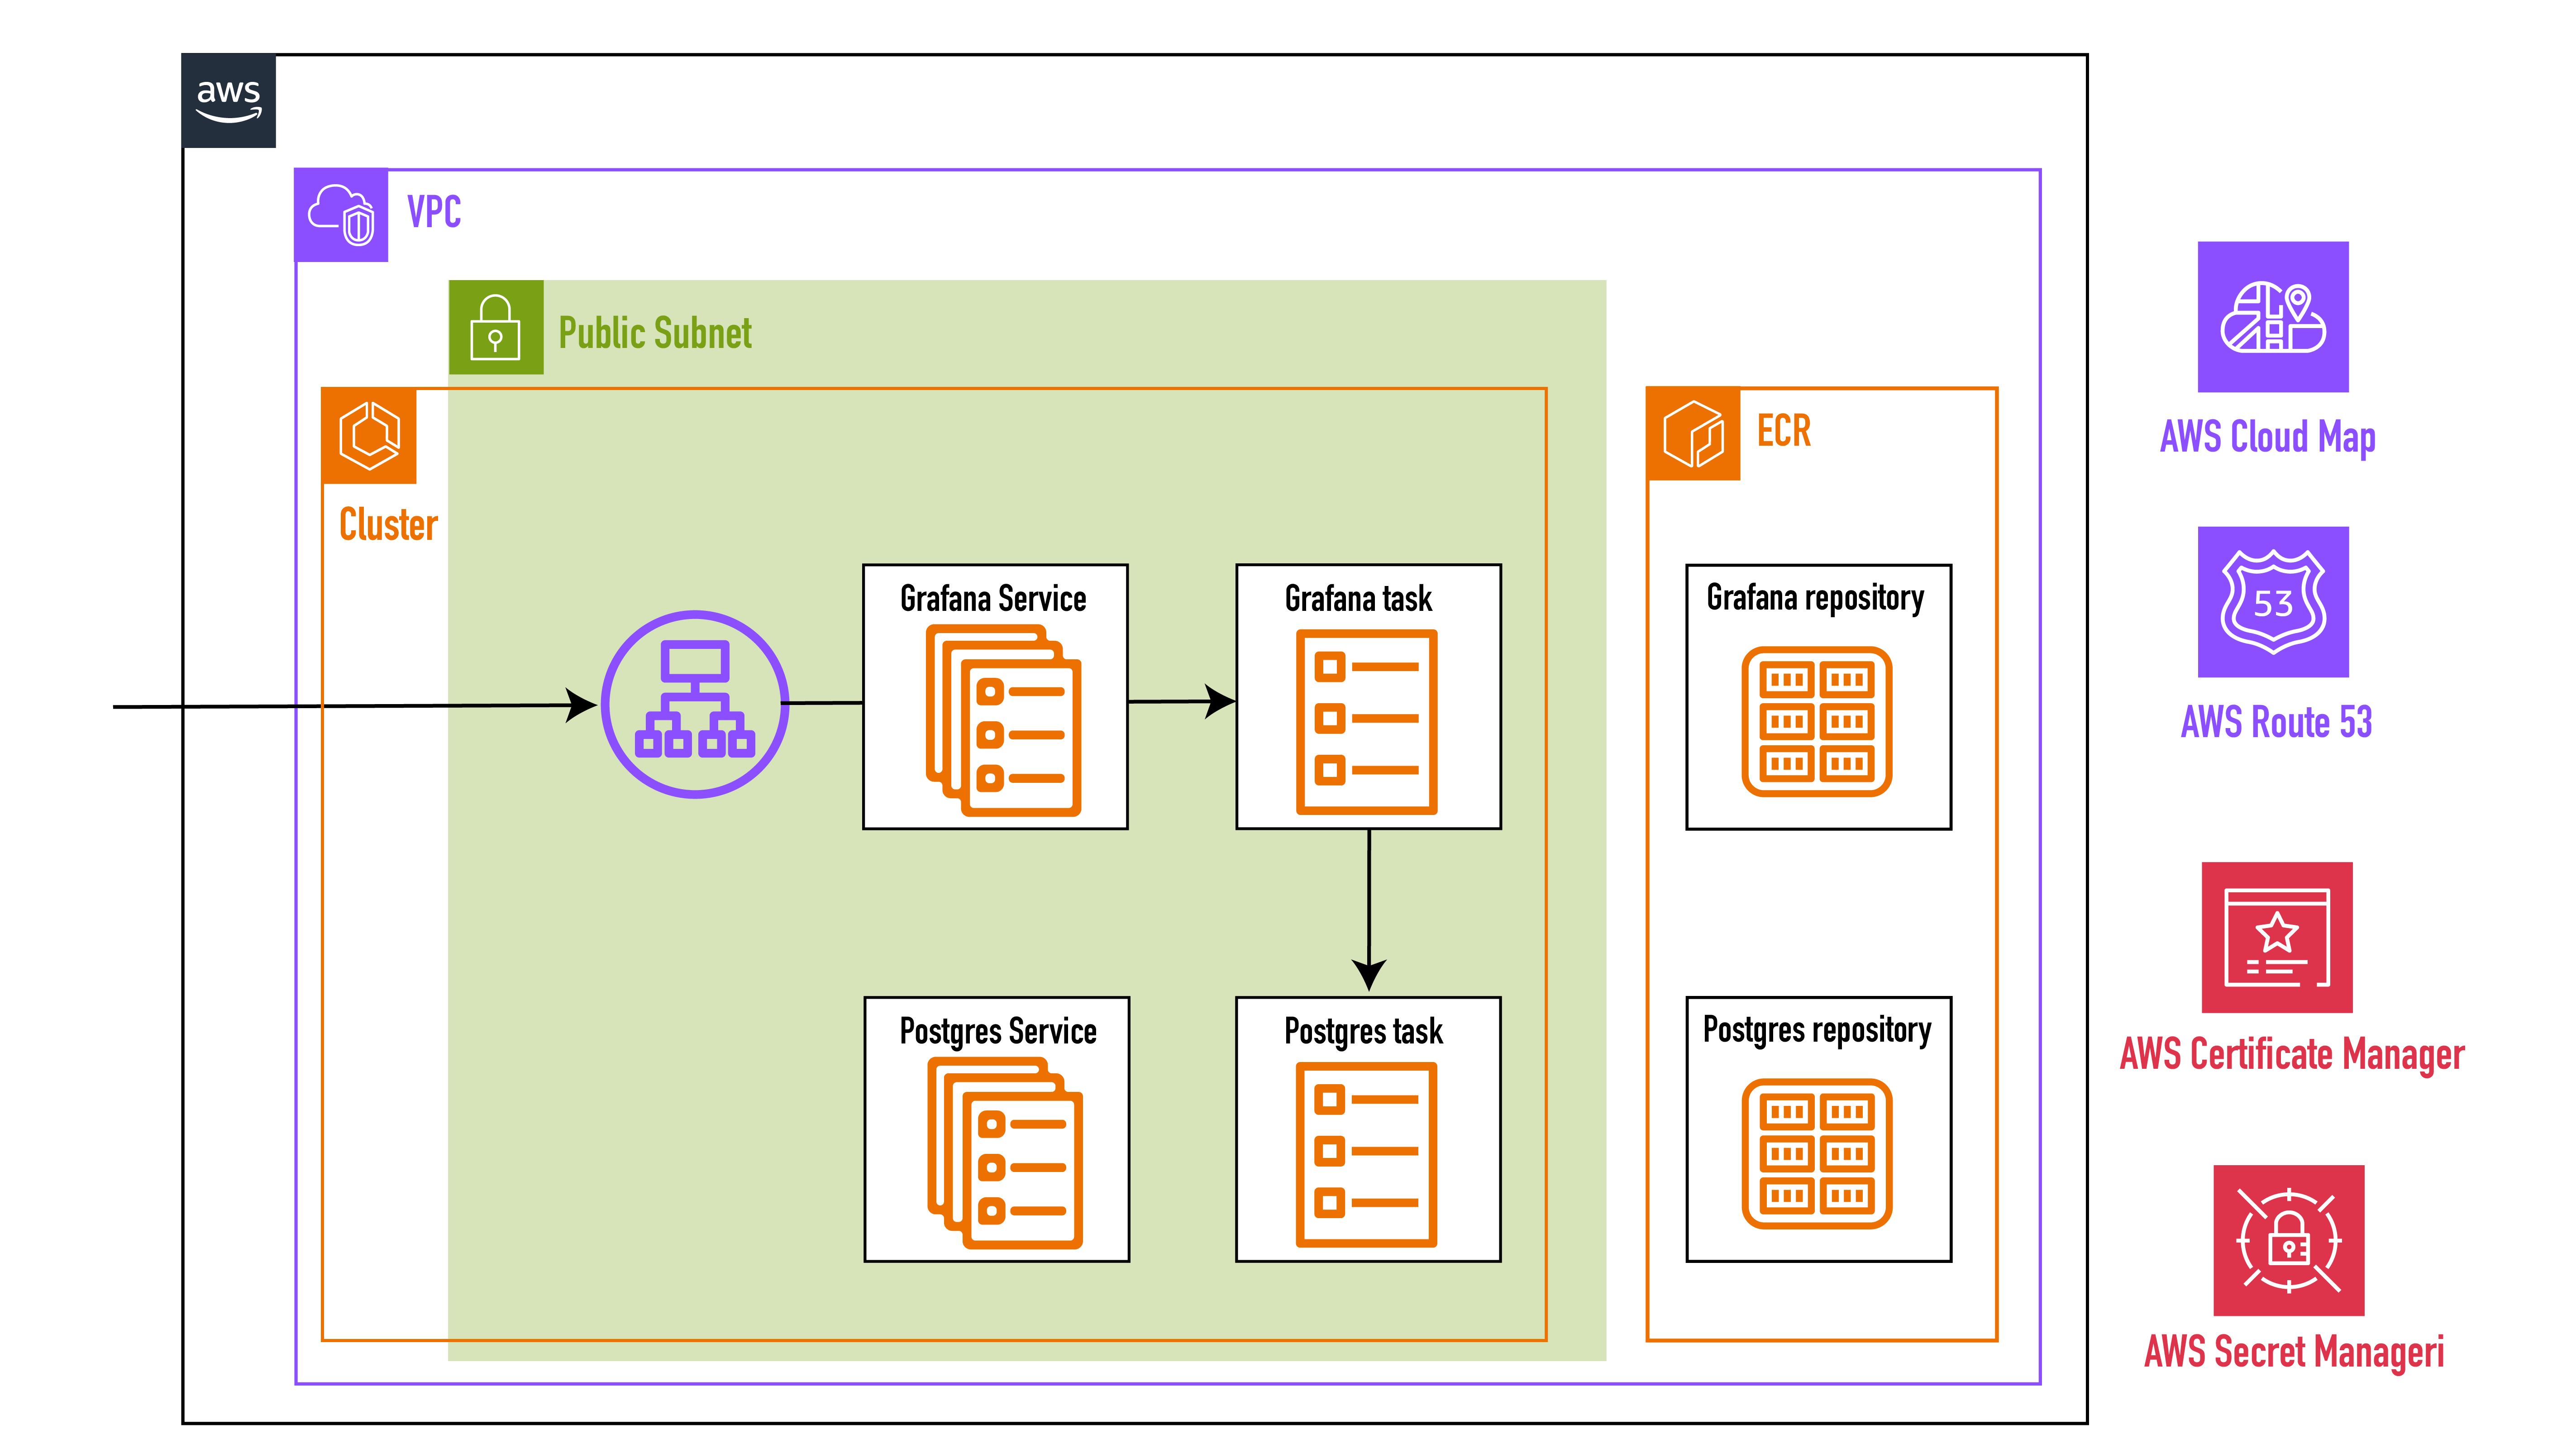 Deployment in AWS